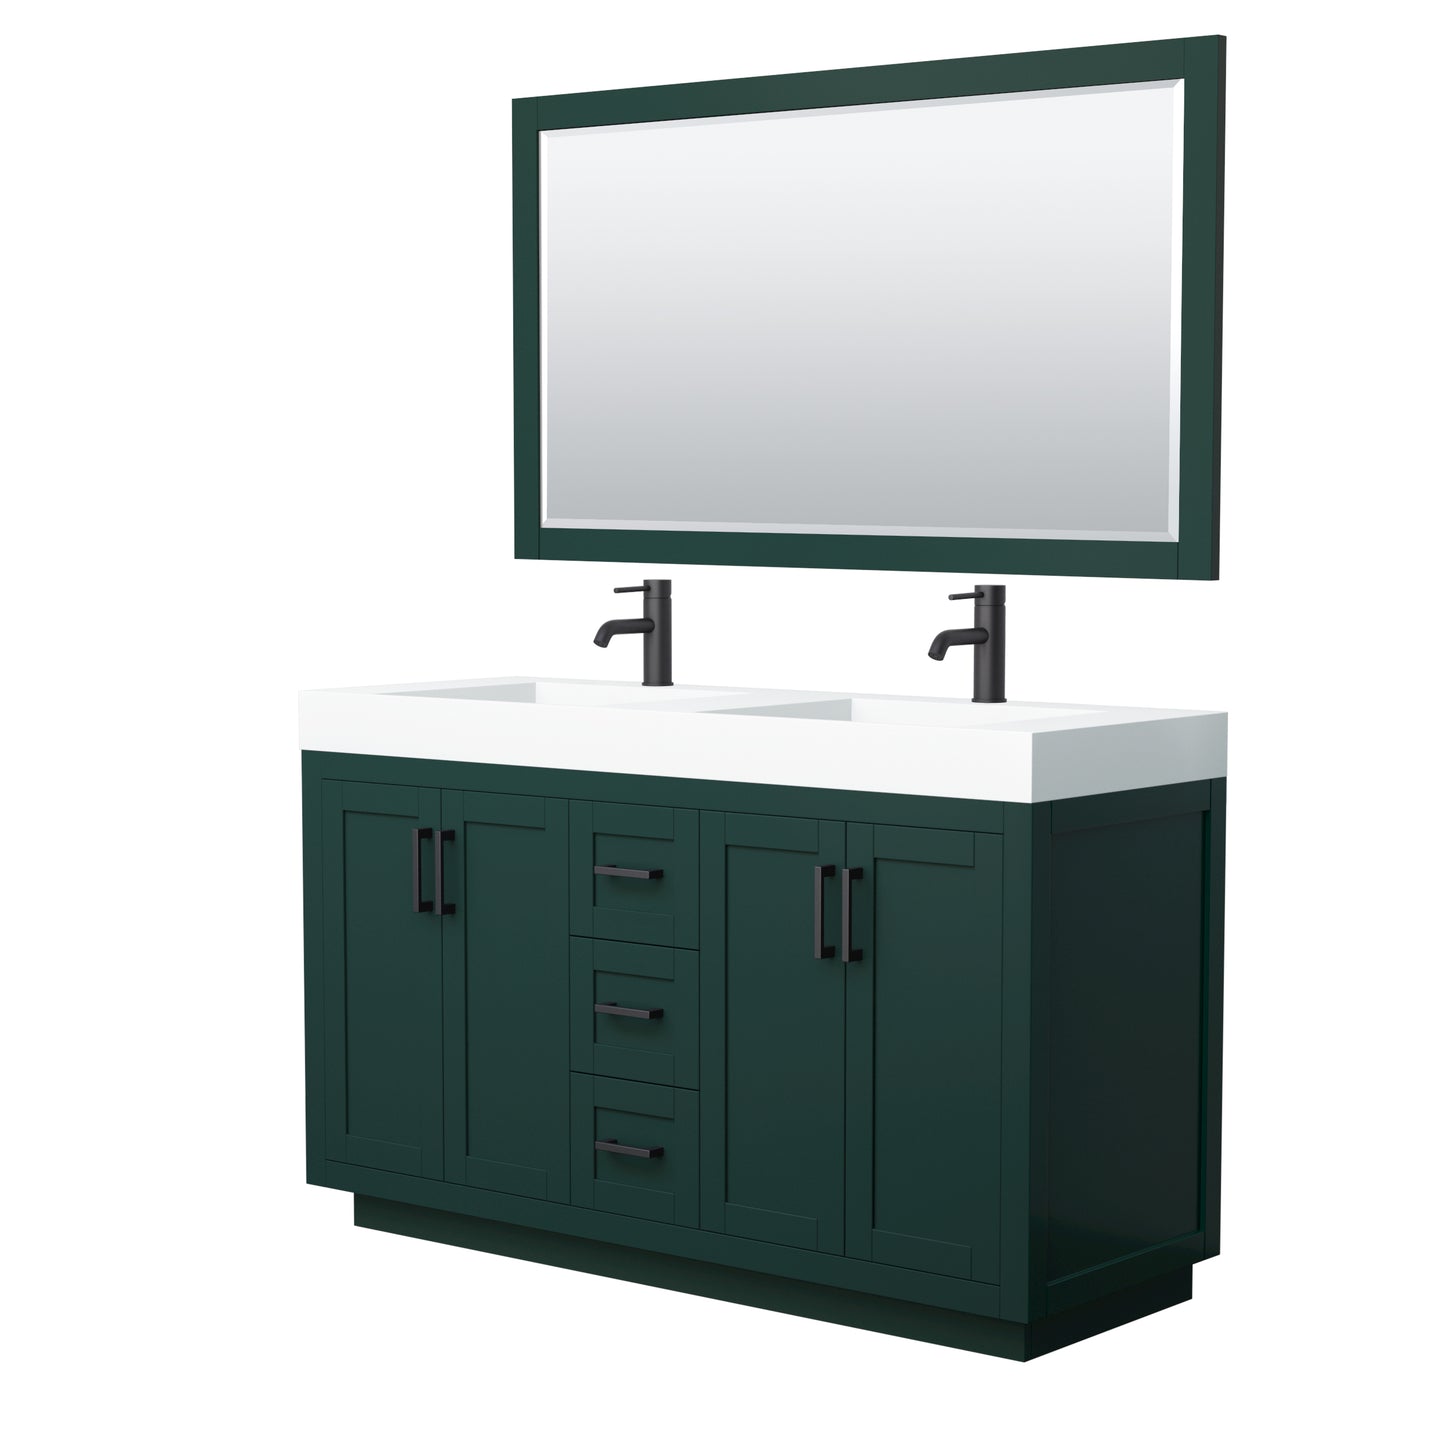 Wyndham Miranda 60 Inch Double Bathroom Vanity in Green with 4 Inch Thick Matte White Solid Surface Integrated Countertop Sinks and Trim - Luxe Bathroom Vanities